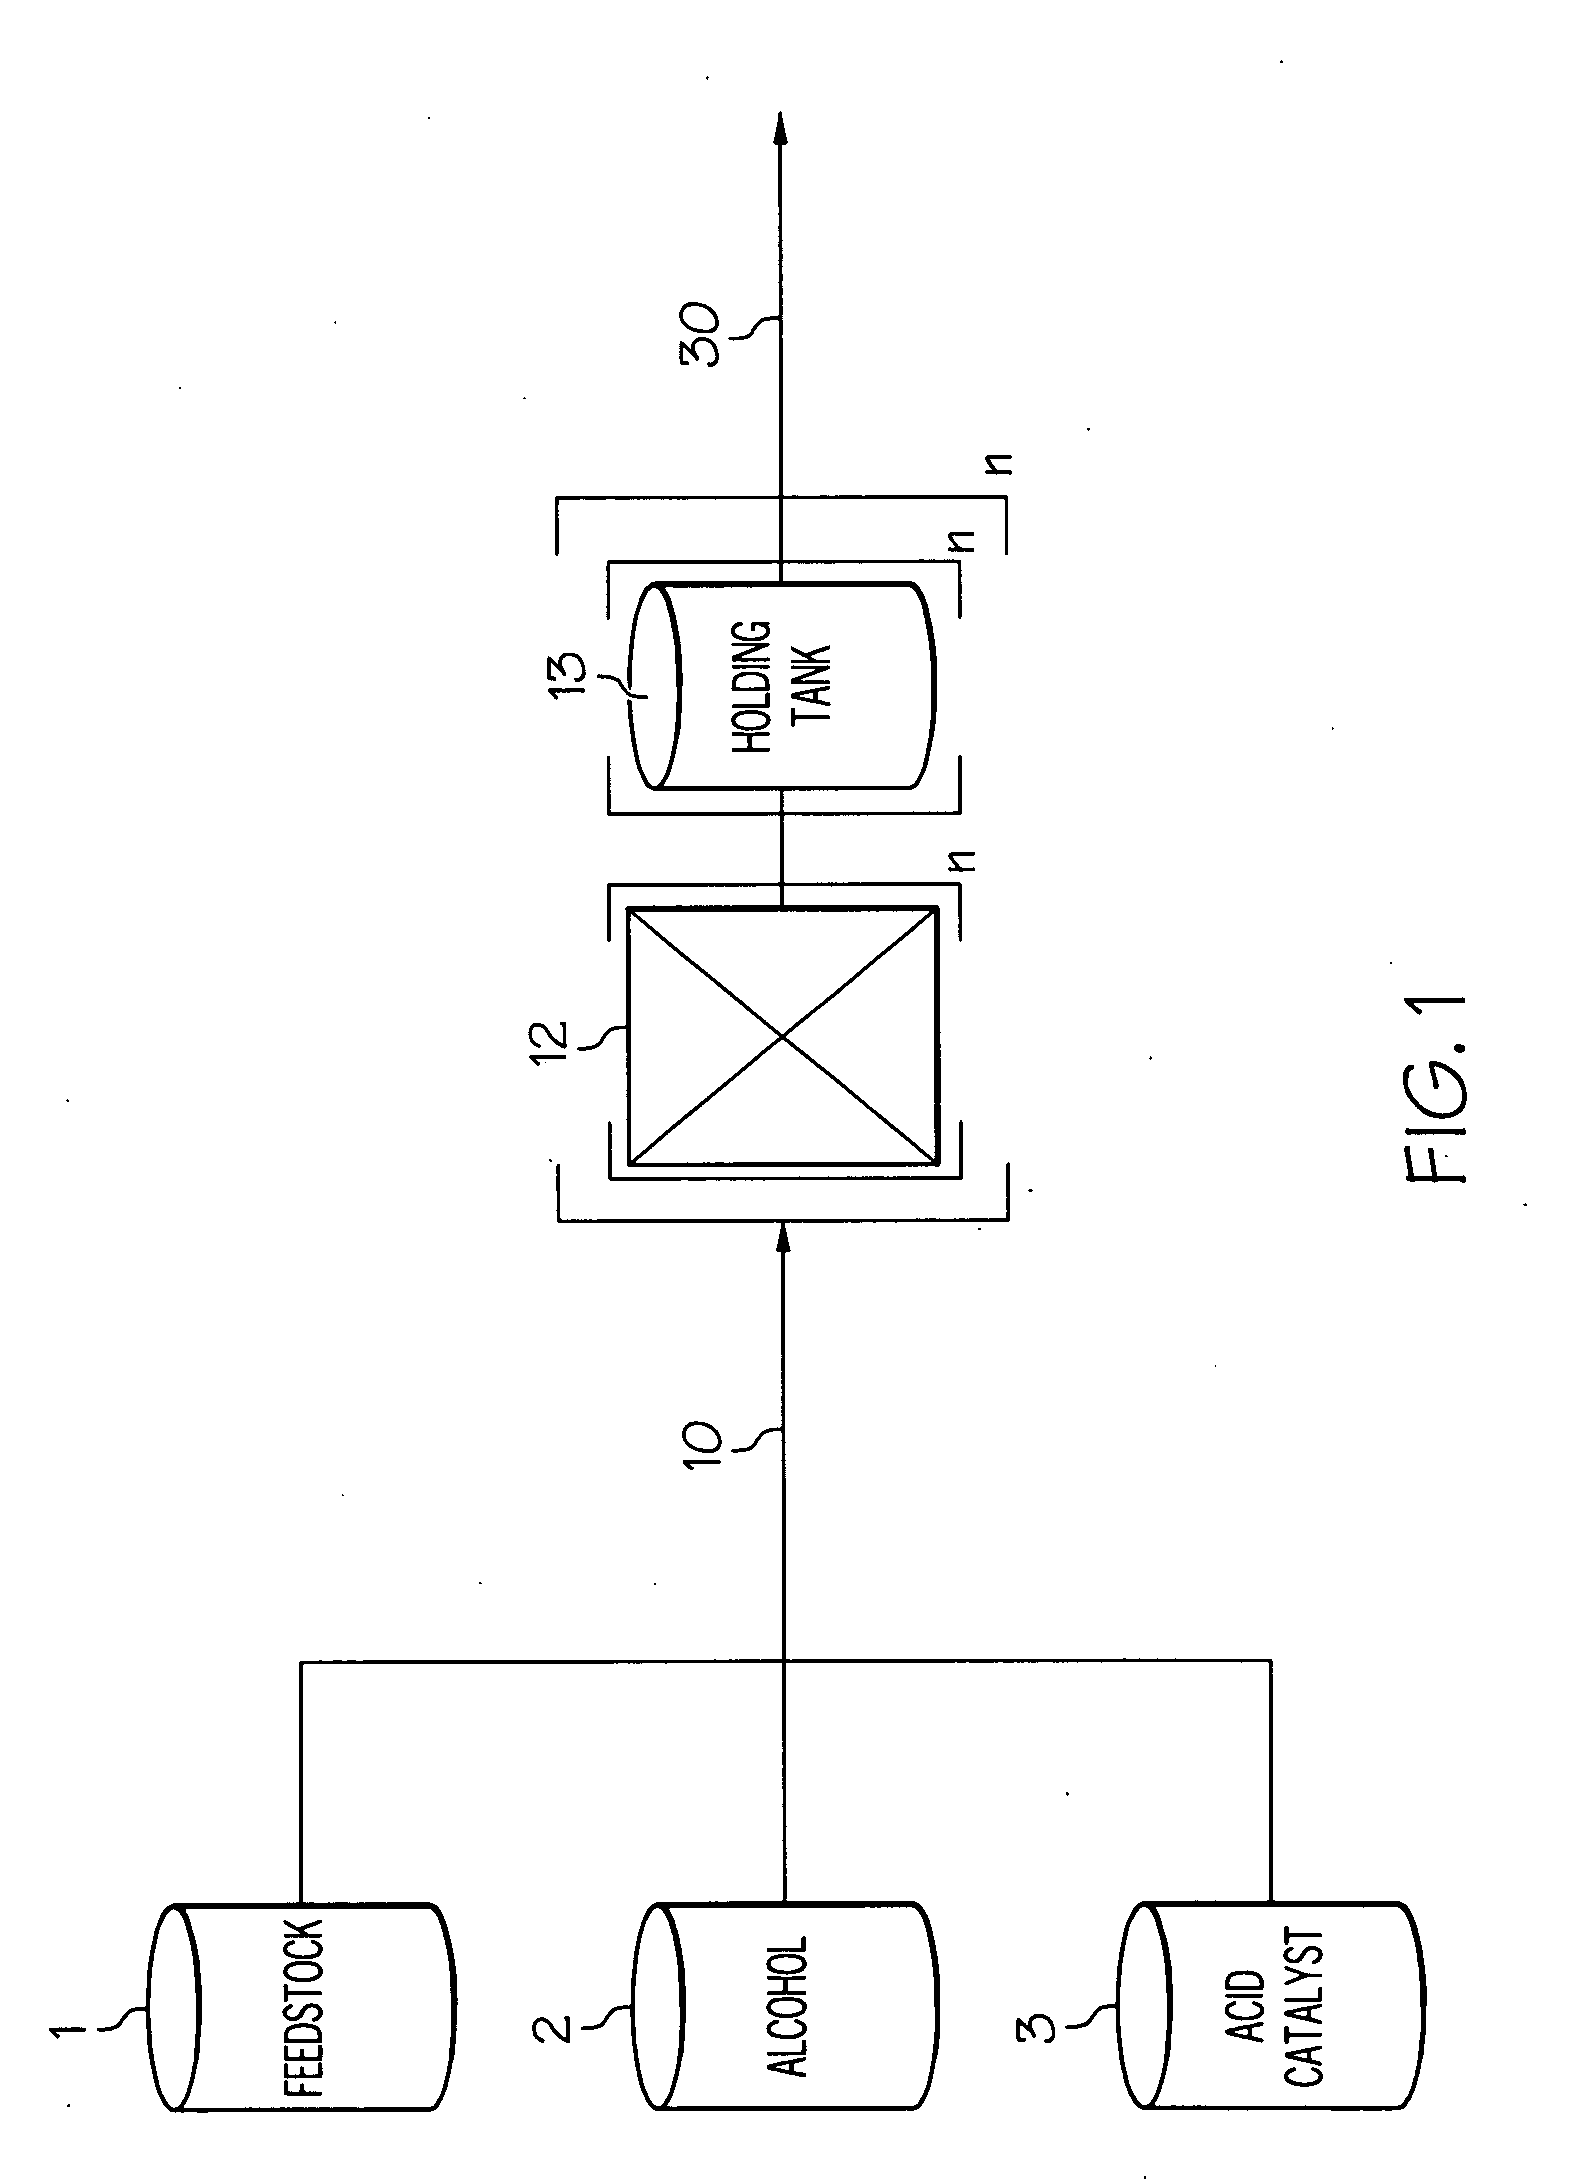 Method for reducing free fatty acid content of biodiesel feedstock